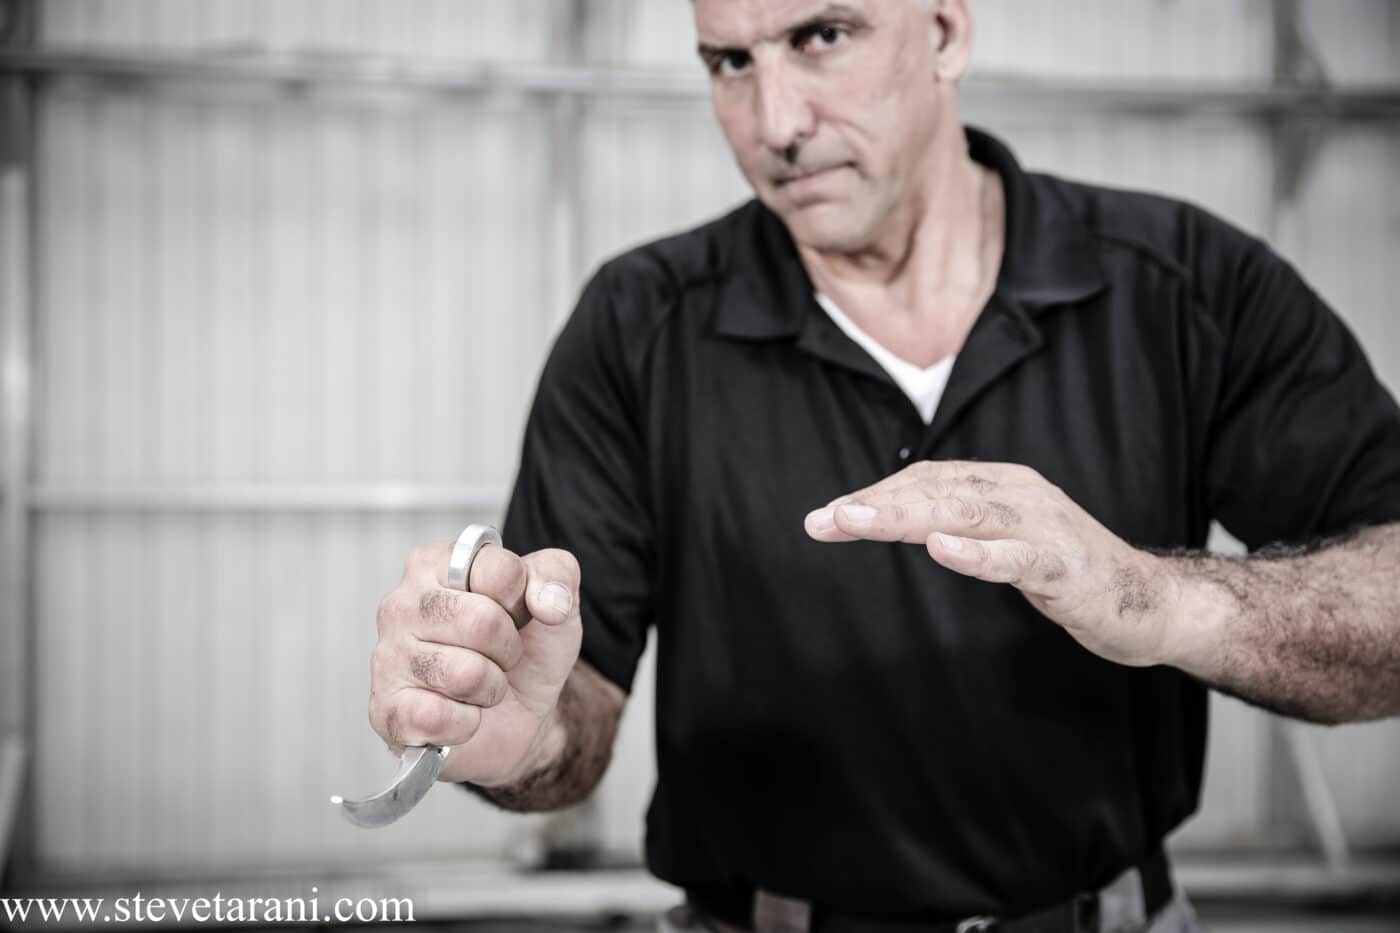 Man using a curved knife in self-defense training